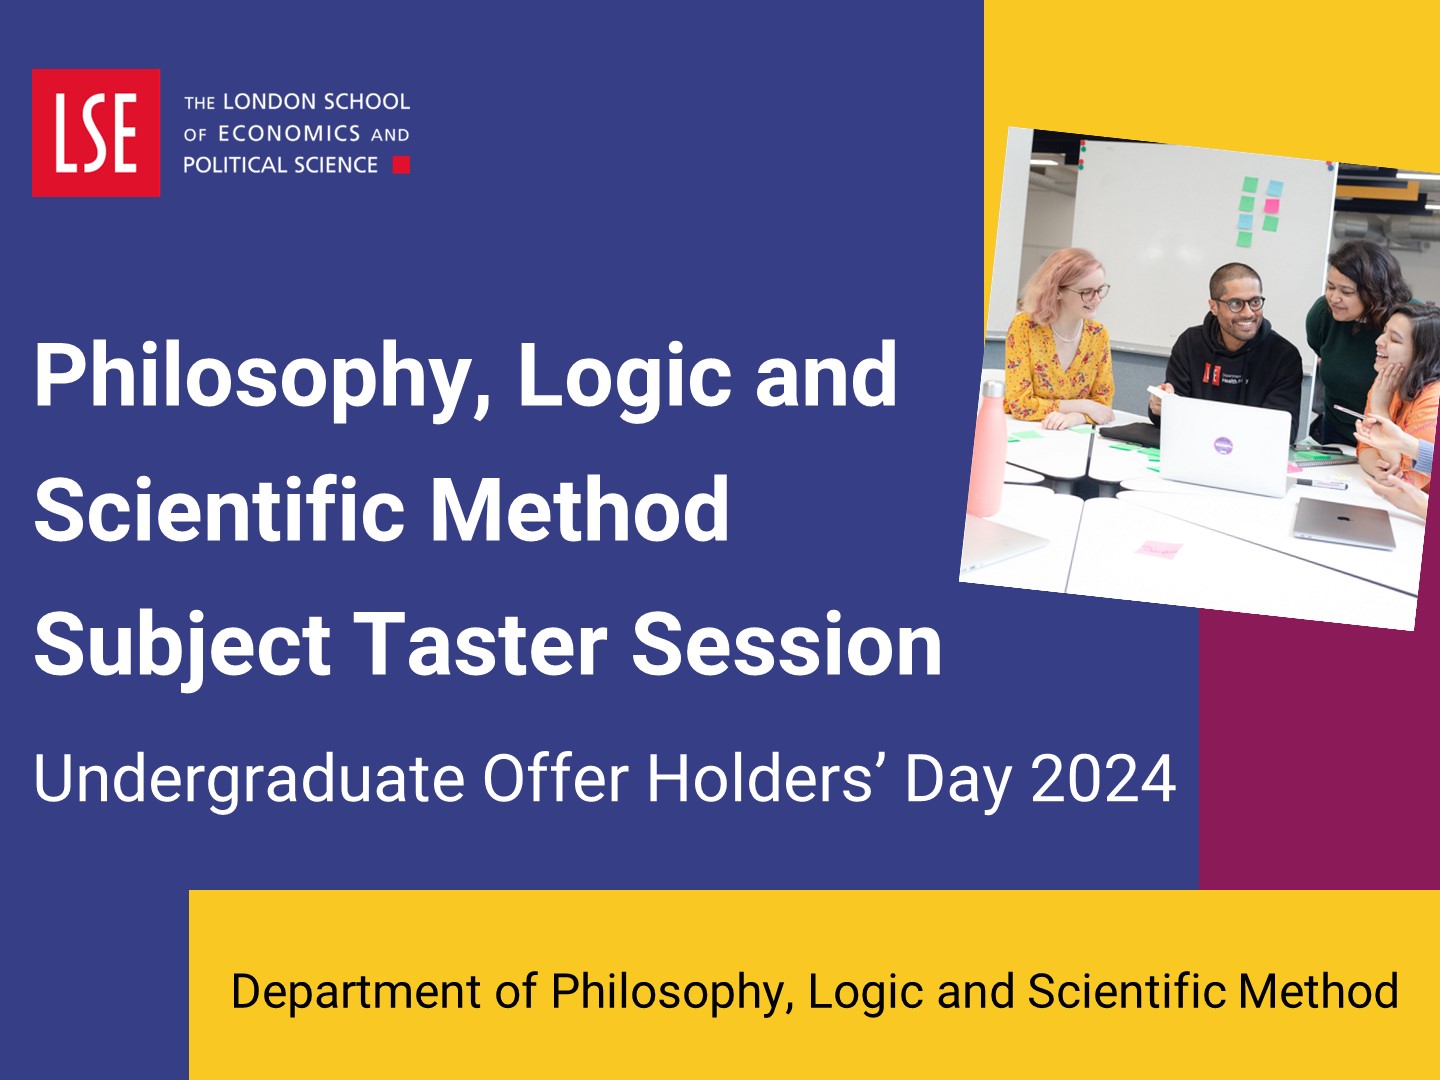 Watch the philosophy subject taster session